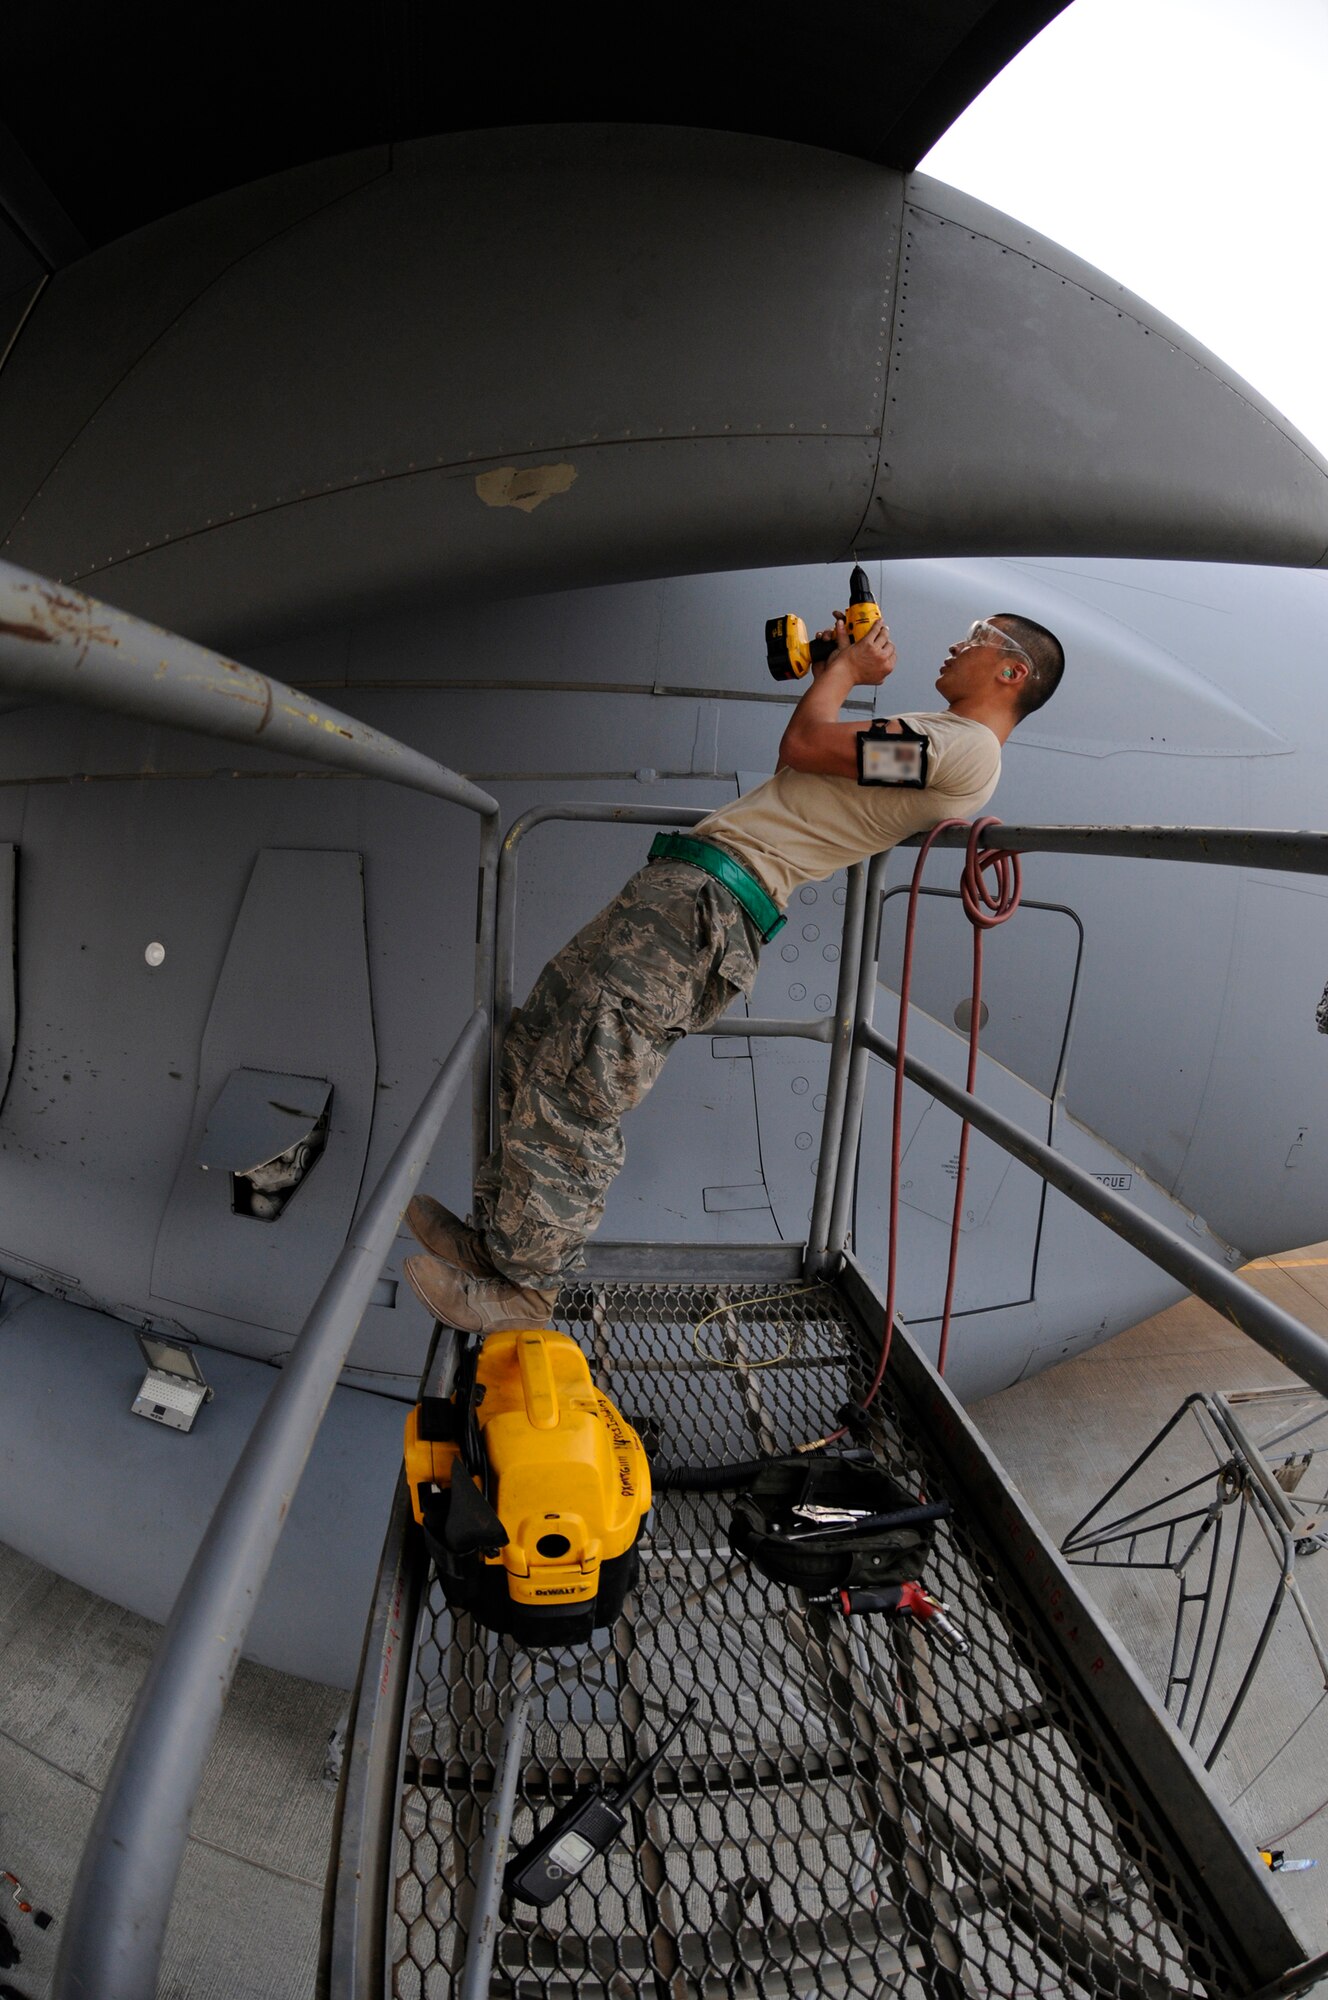 Airman 1st Class Matthew Enter, 379th Expeditionary Maintenance Squadron, uses all the leverage he can get to drill out a stripped screw head, October 17, 2008, at an undisclosed air base in Southwest Asia.  The bad screws are being removed so the crew chiefs can pull the panel and do maintenance on a C-17 Globemaster III.  Airman Enter, a native of Rochester, N.Y., is deployed from Fairchild Air Force Base, Wash., in support of Operations Iraqi and Enduring Freedom and Joint Task Force-Horn of Africa.  (U.S. Air Force photo by Tech. Sgt. Michael Boquette/Released)